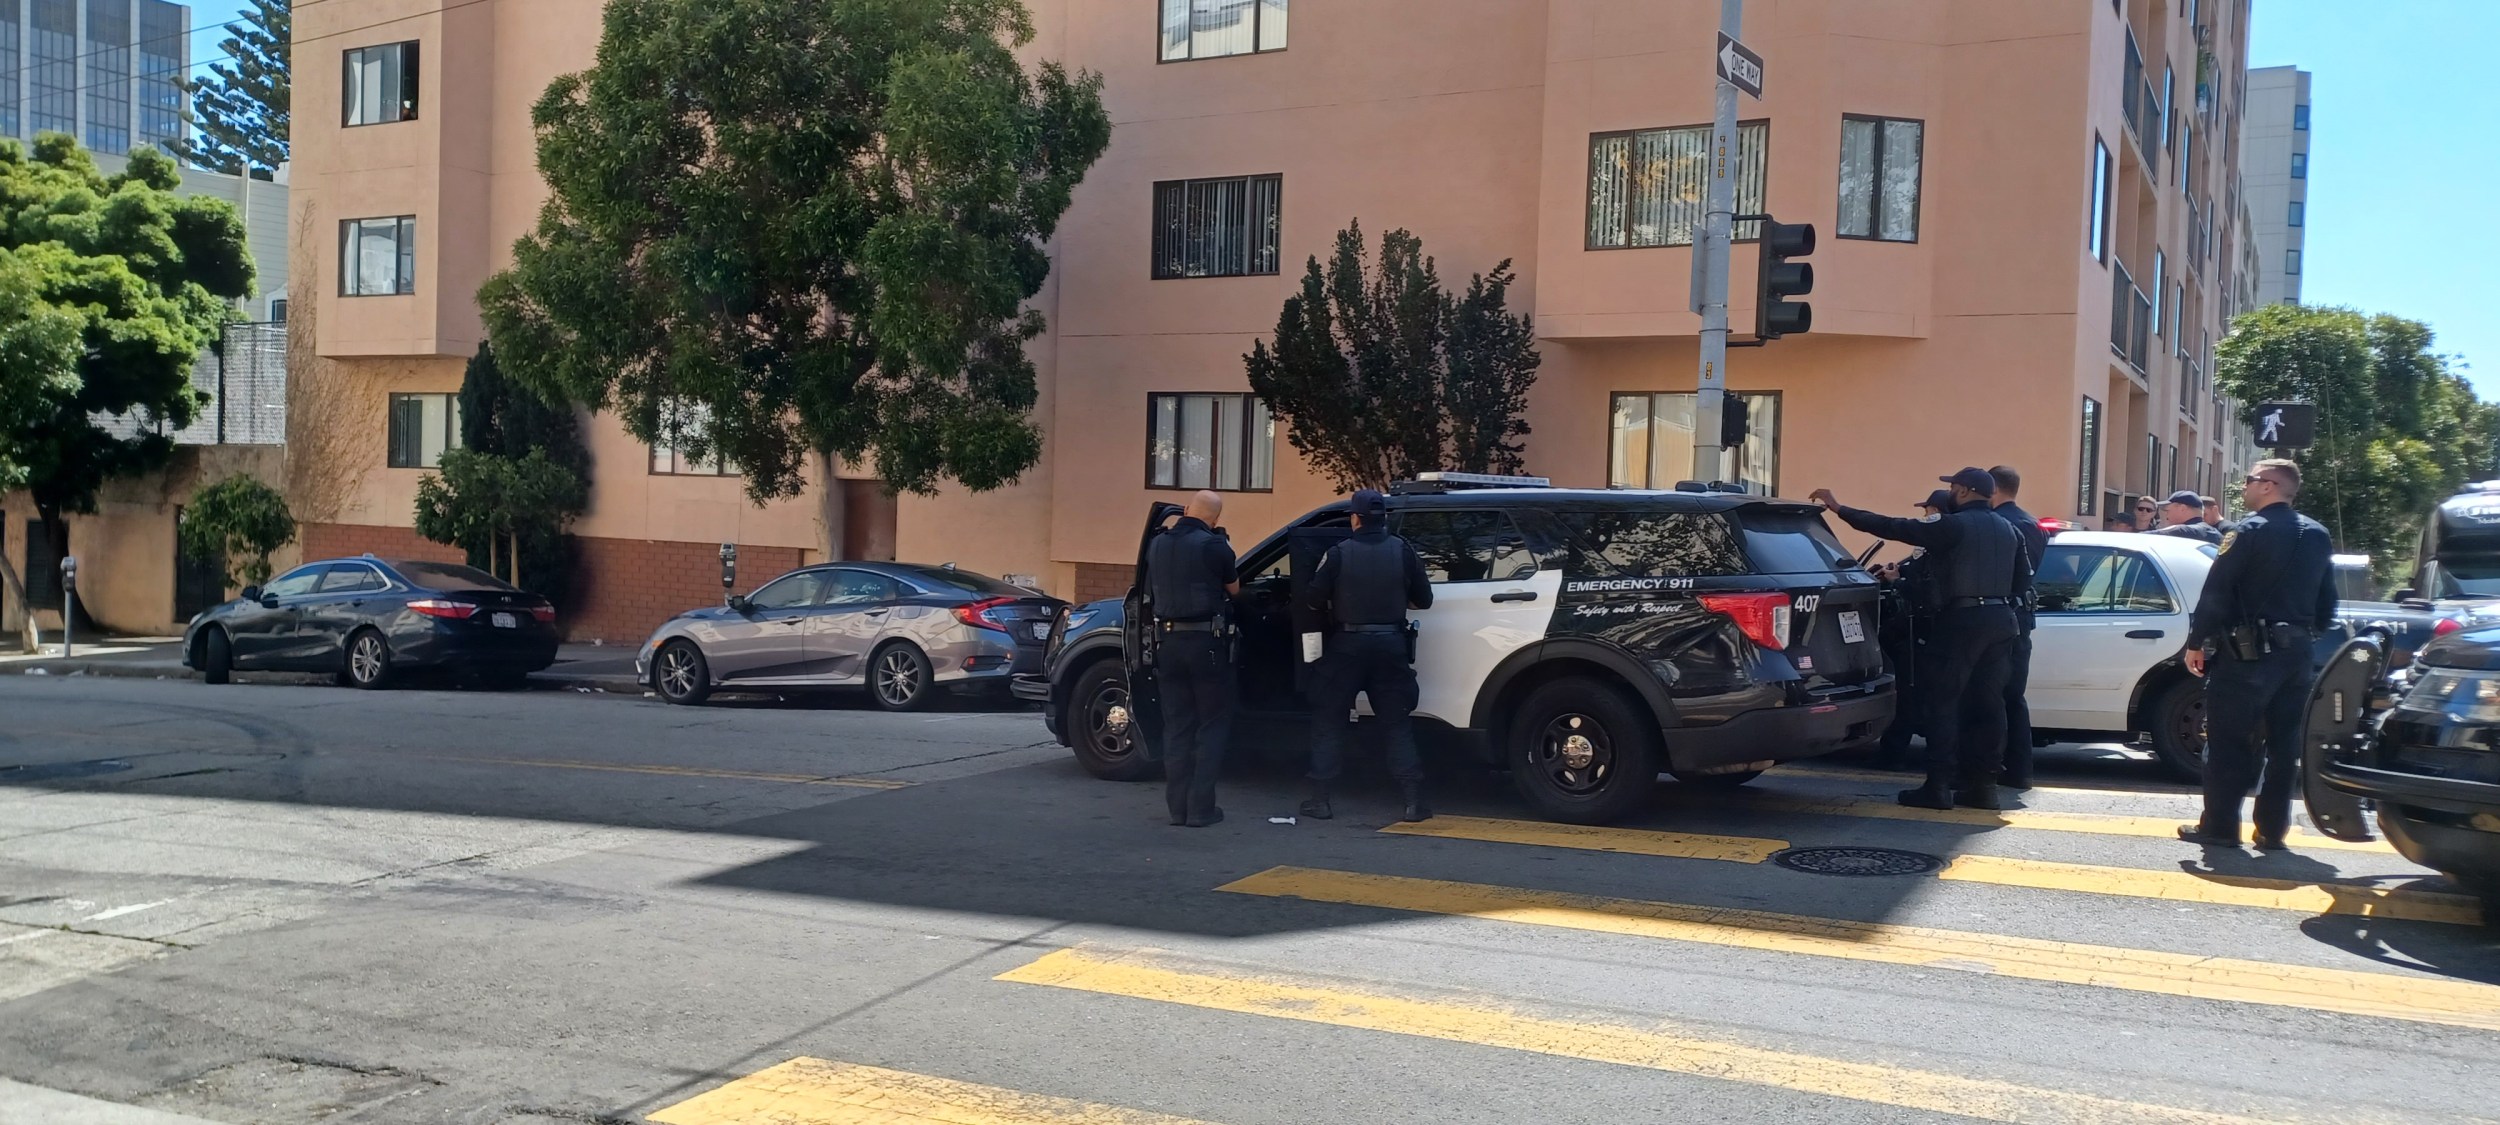 San Francisco police respond to a report of a person with a gun near Eddy and Franklin streets Wednesday afternoon.